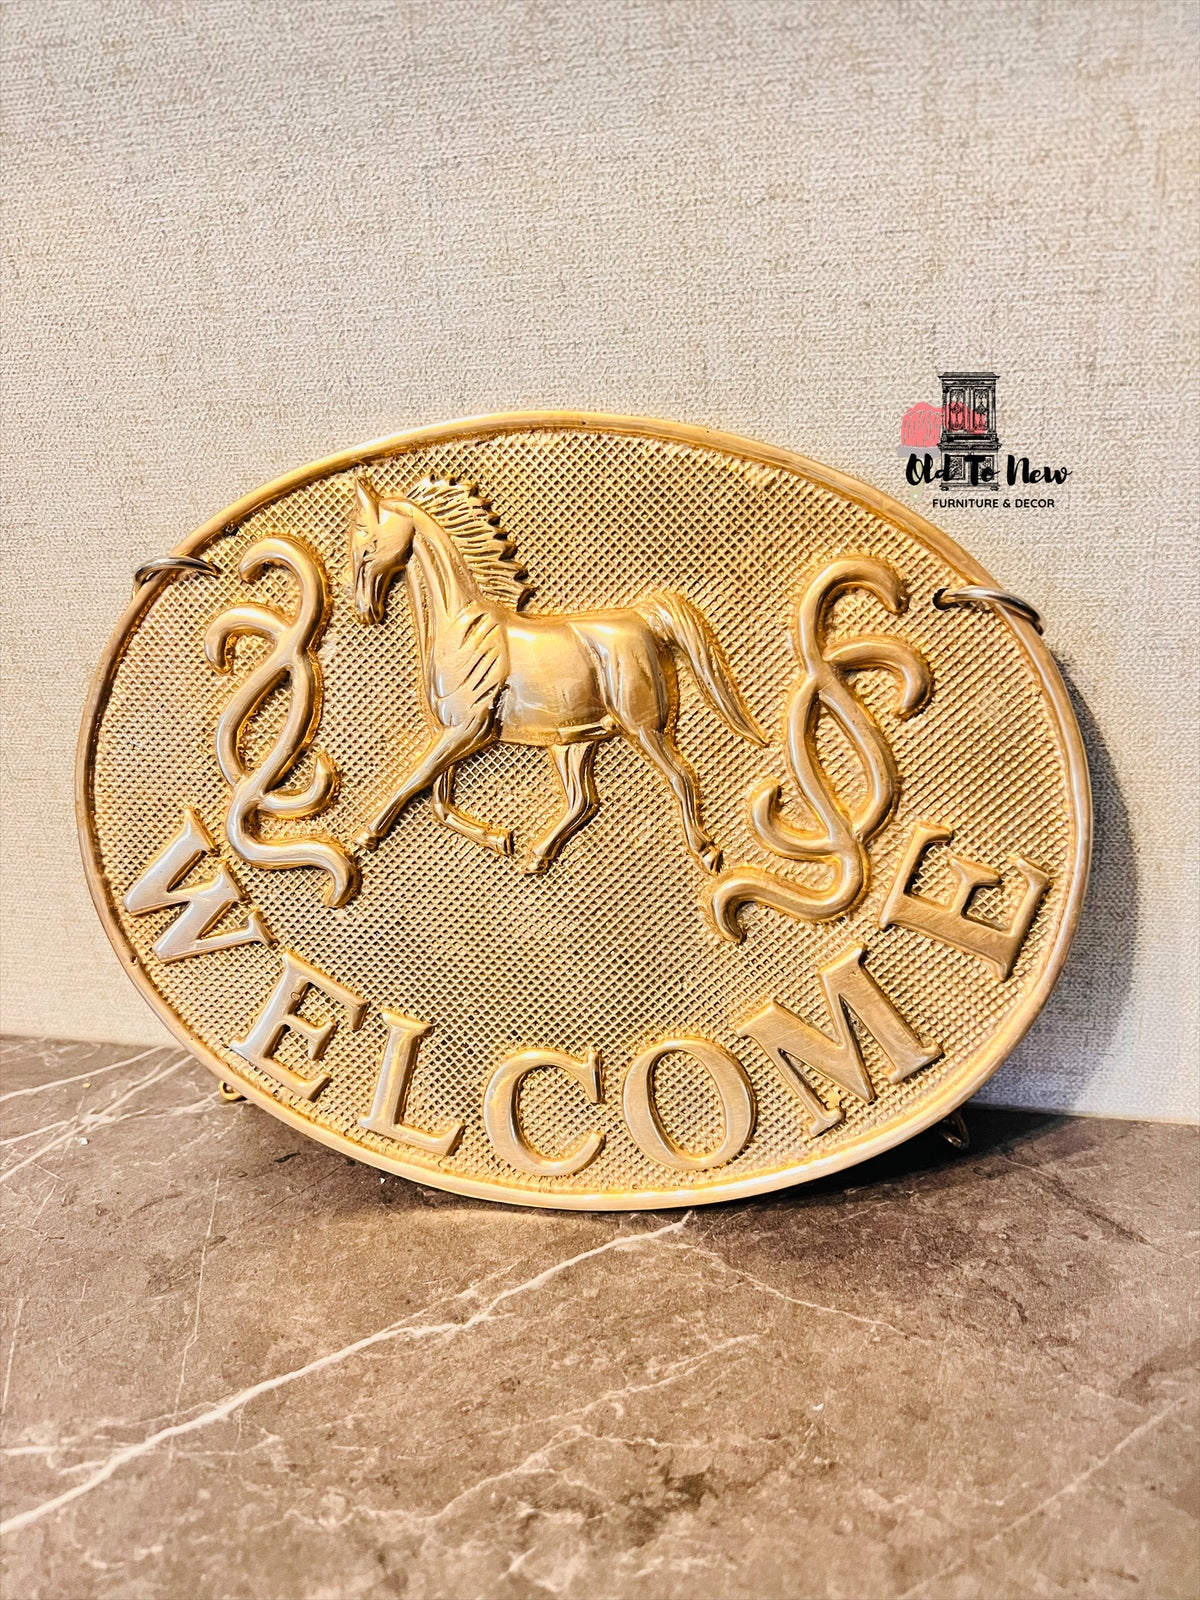 Brass Antique Welcome Sign with a Trotting Horse